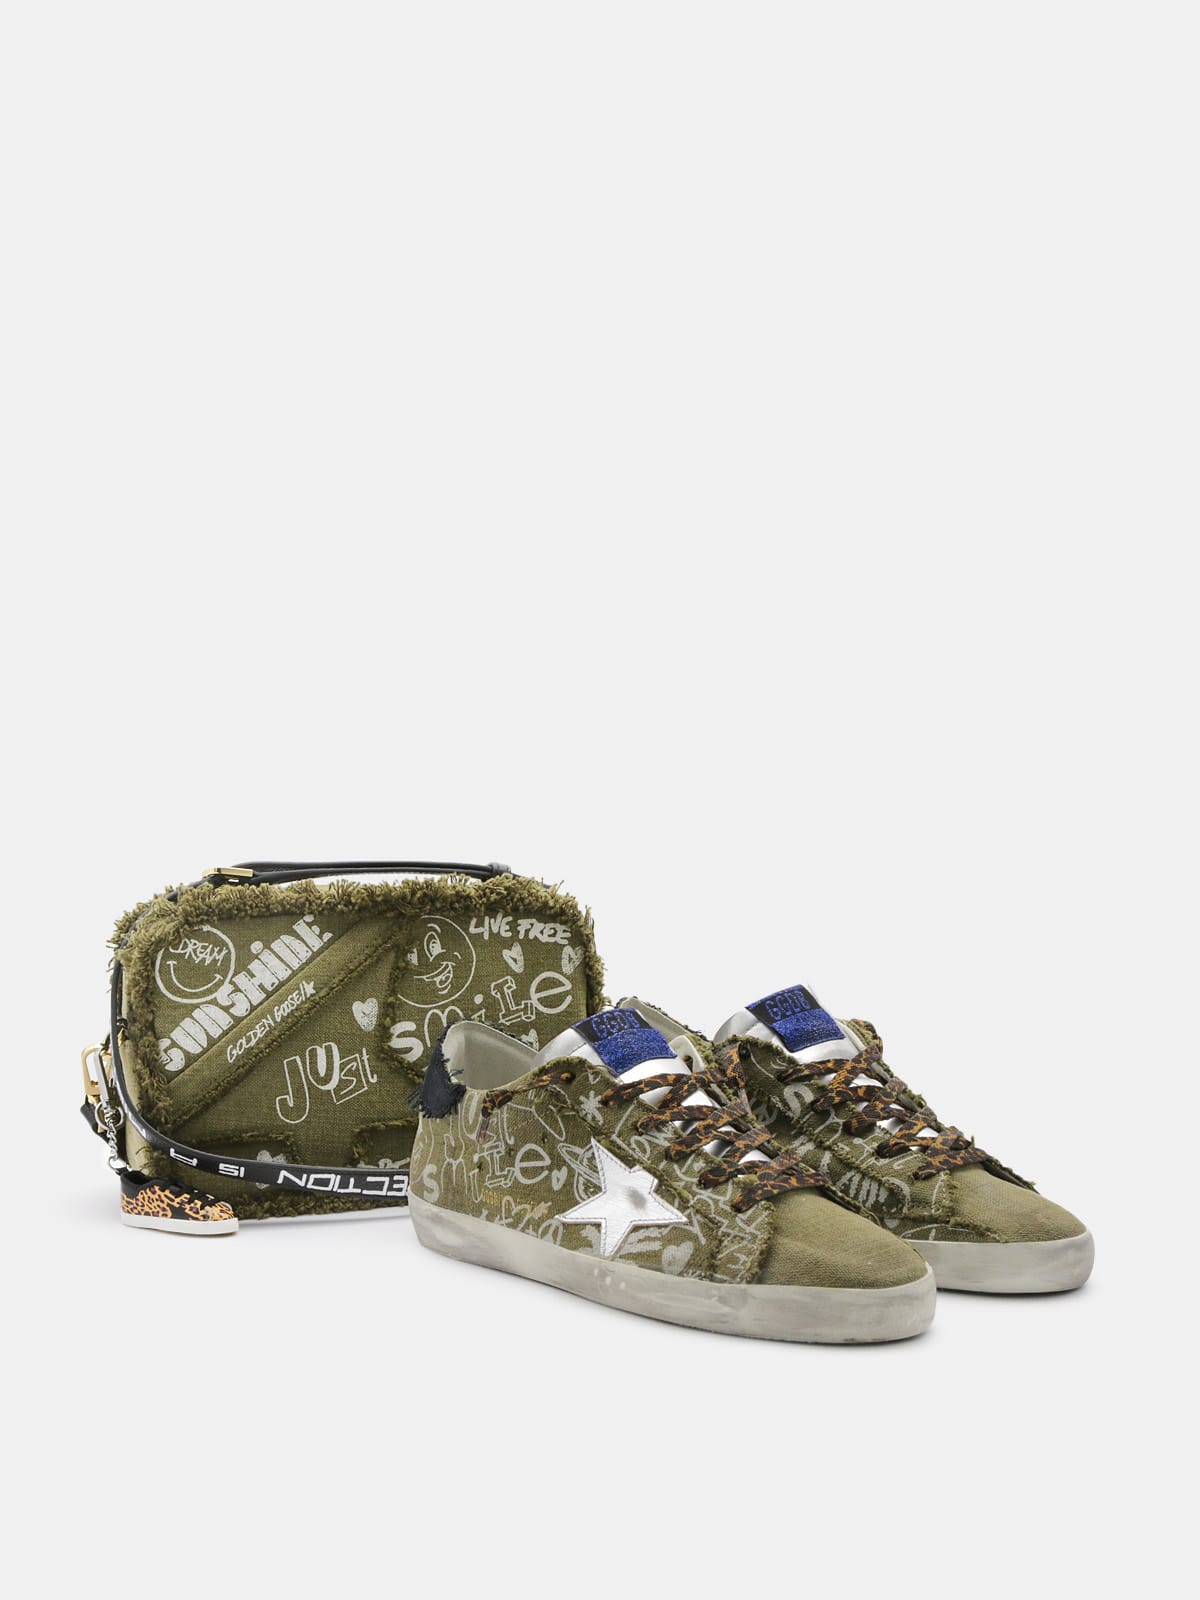 Golden Goose - Super-Star sneakers in green cotton with contrasting white decorations in 